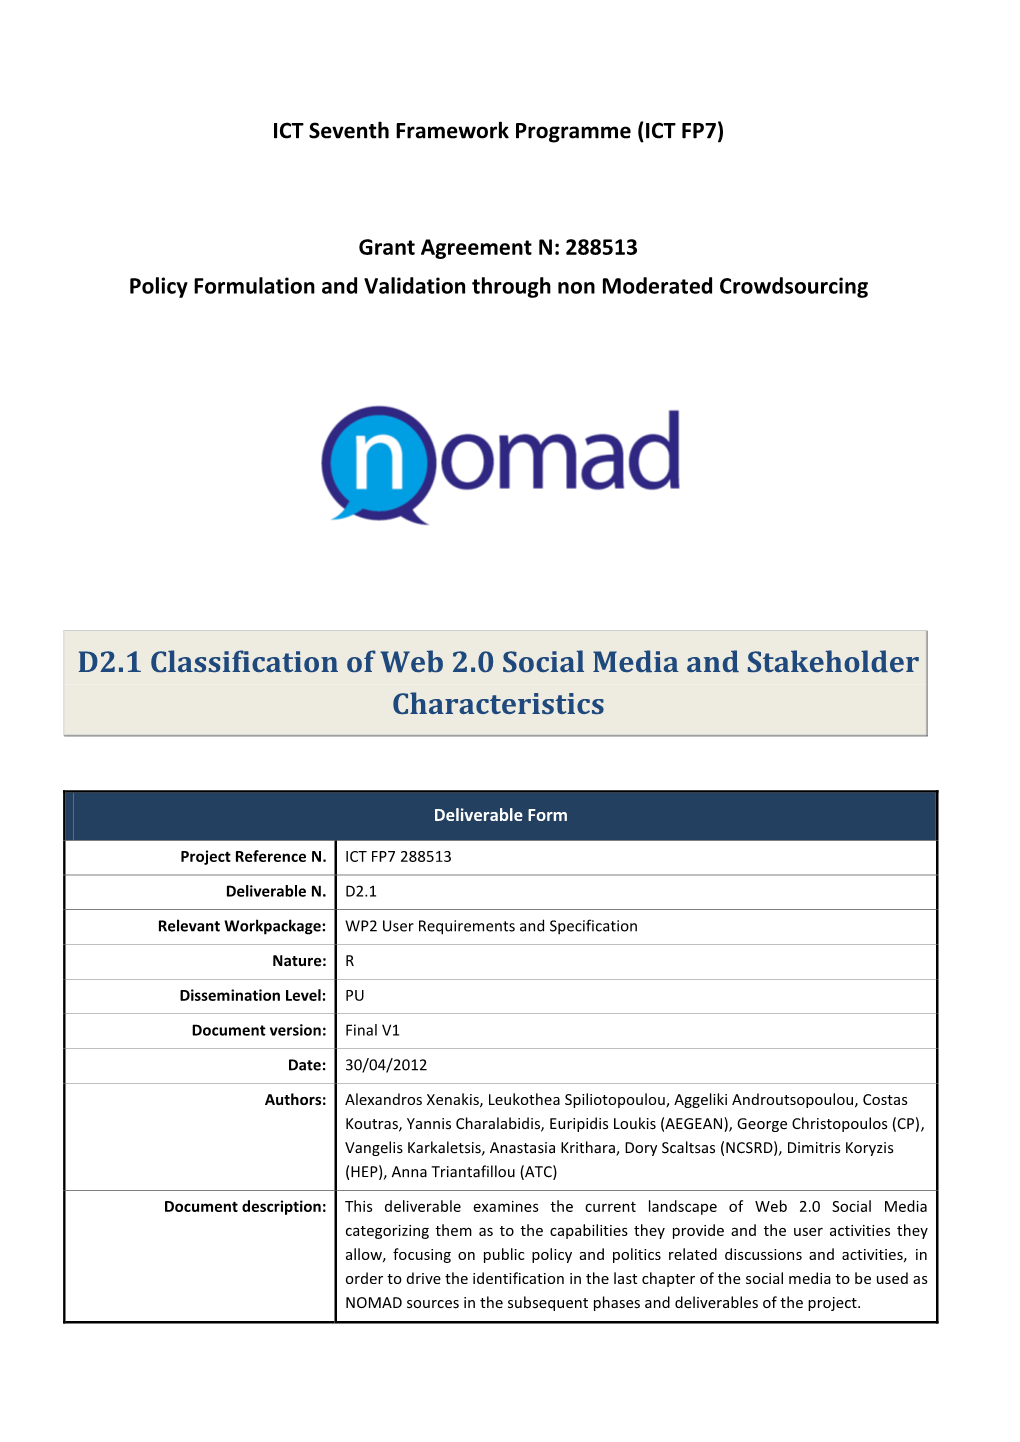 Classification of Web 2.0 Social Media and Stakeholder Characteristics